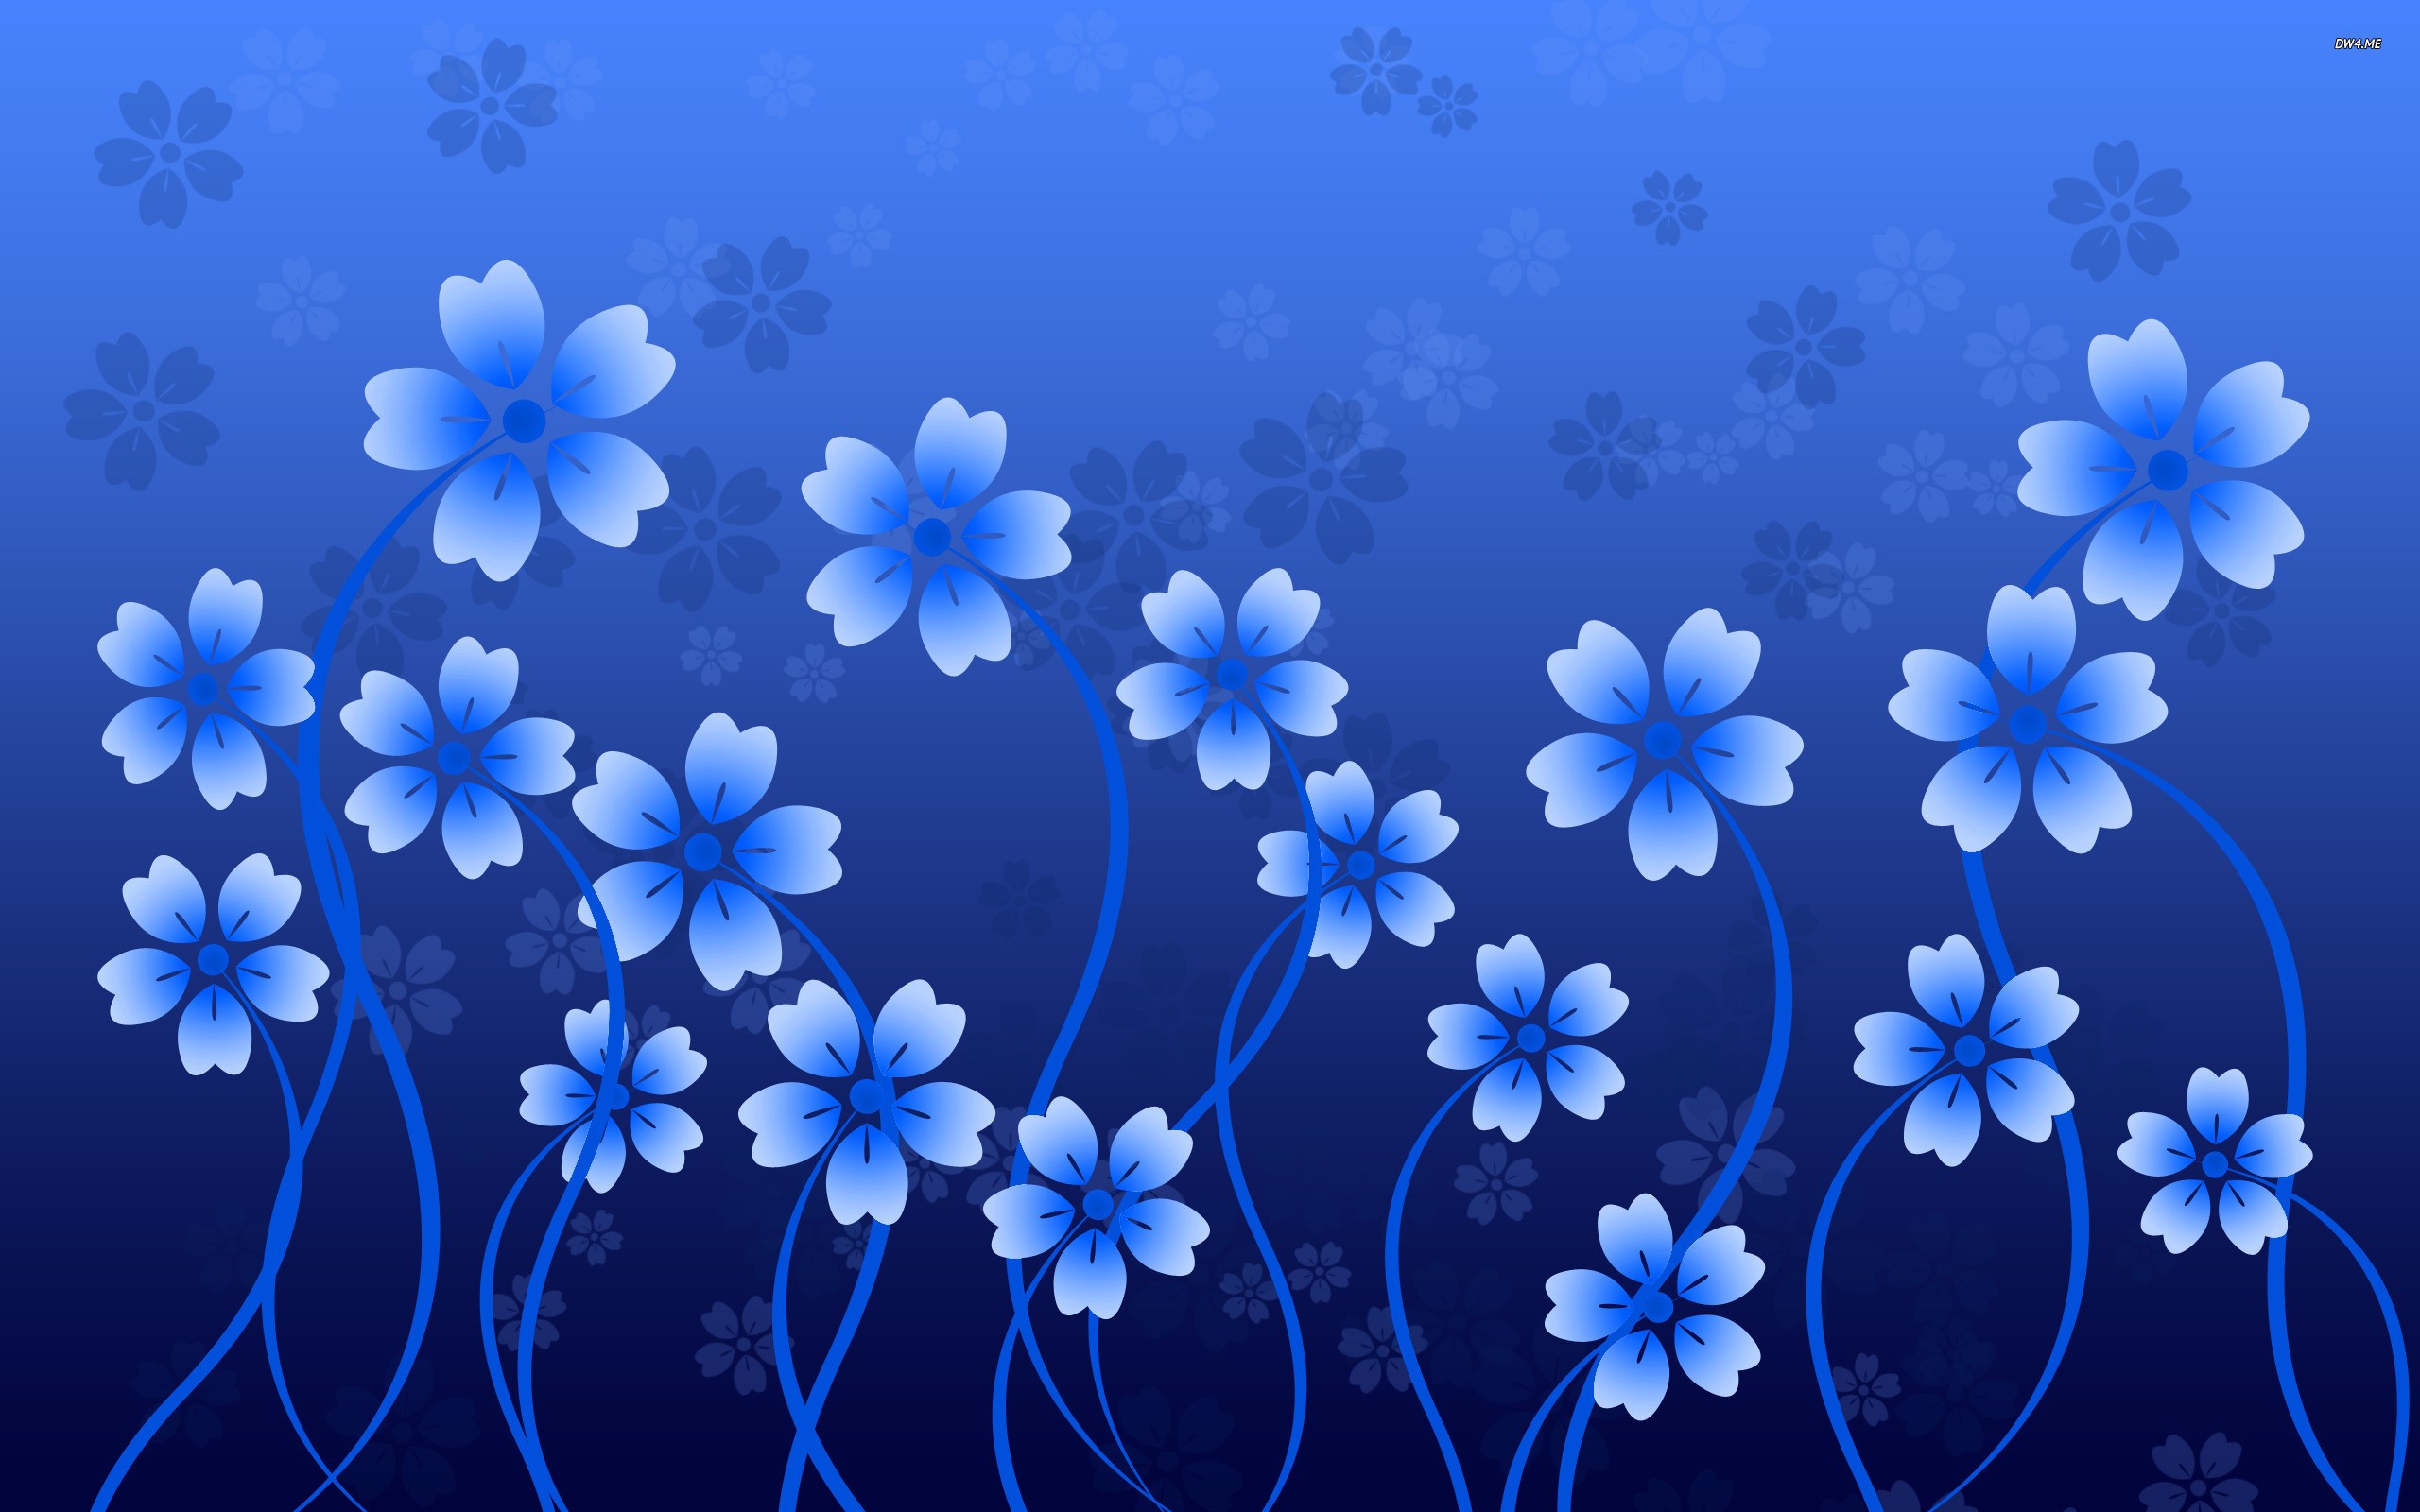 Blue White Floral Wallpaper Seamless Images Browse 362951 Stock Photos   Vectors Free Download with Trial  Shutterstock